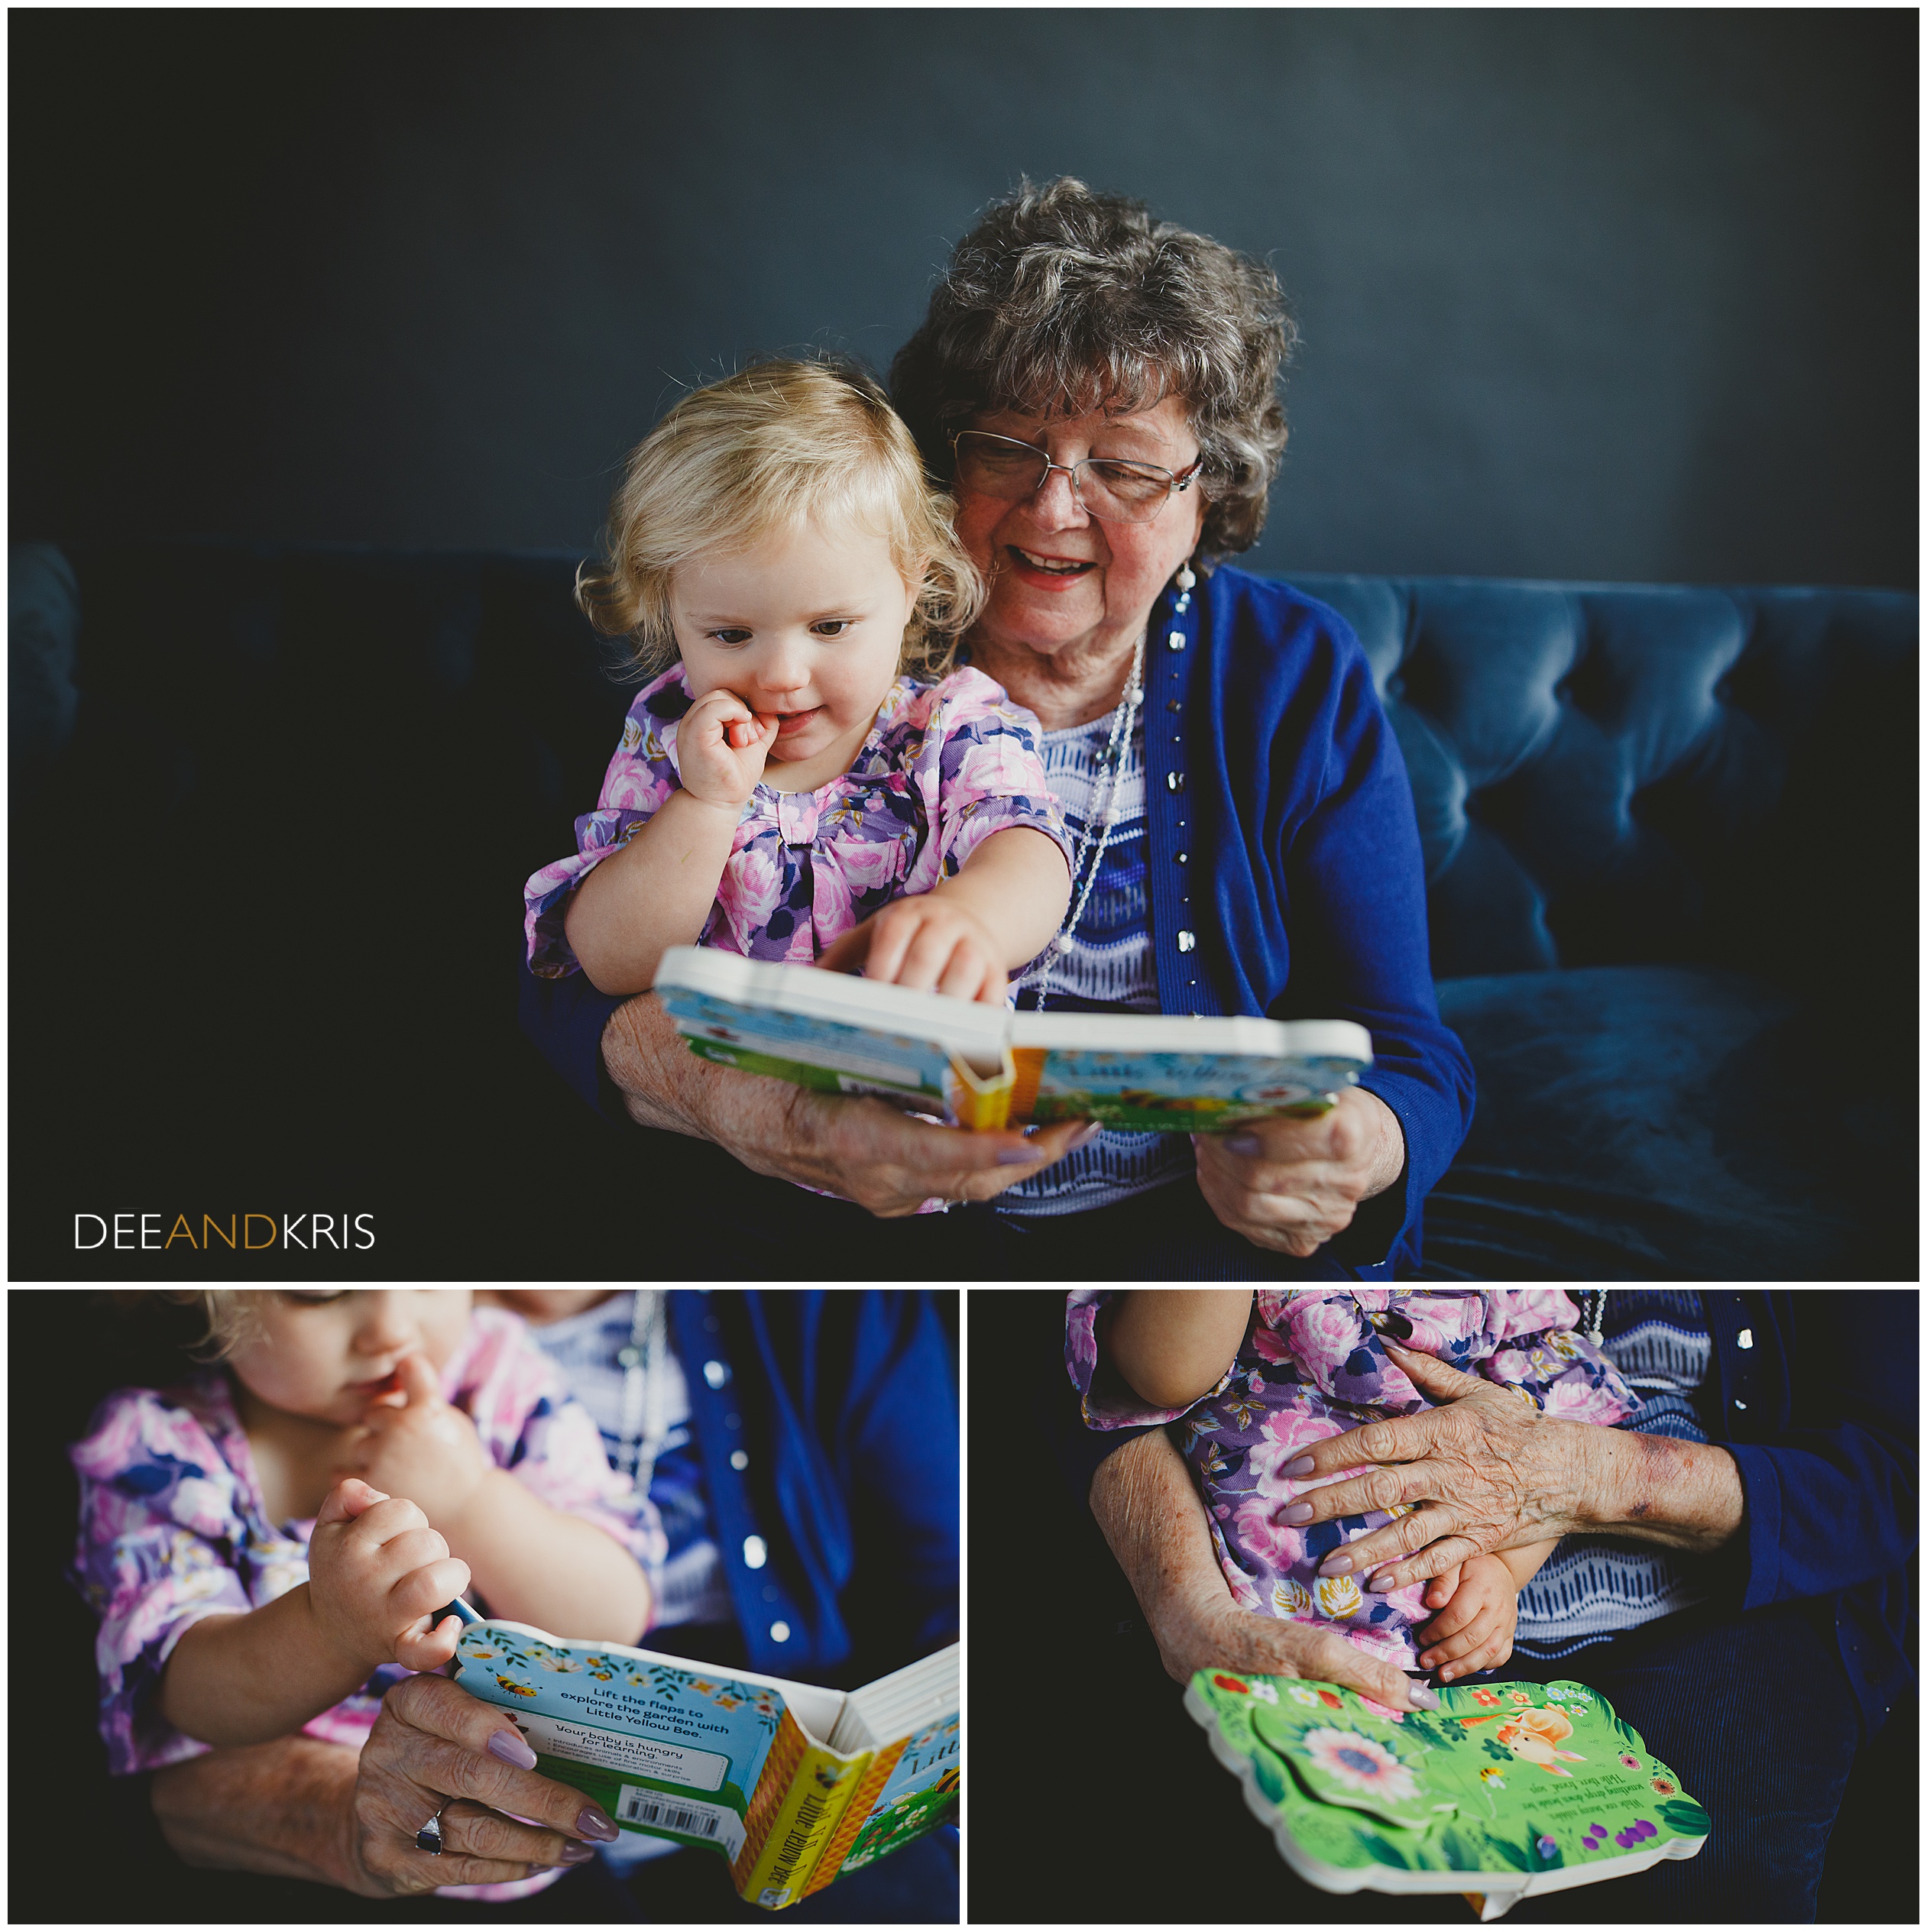 Dee and Kris Photography photograph grandchild with her great grandmother